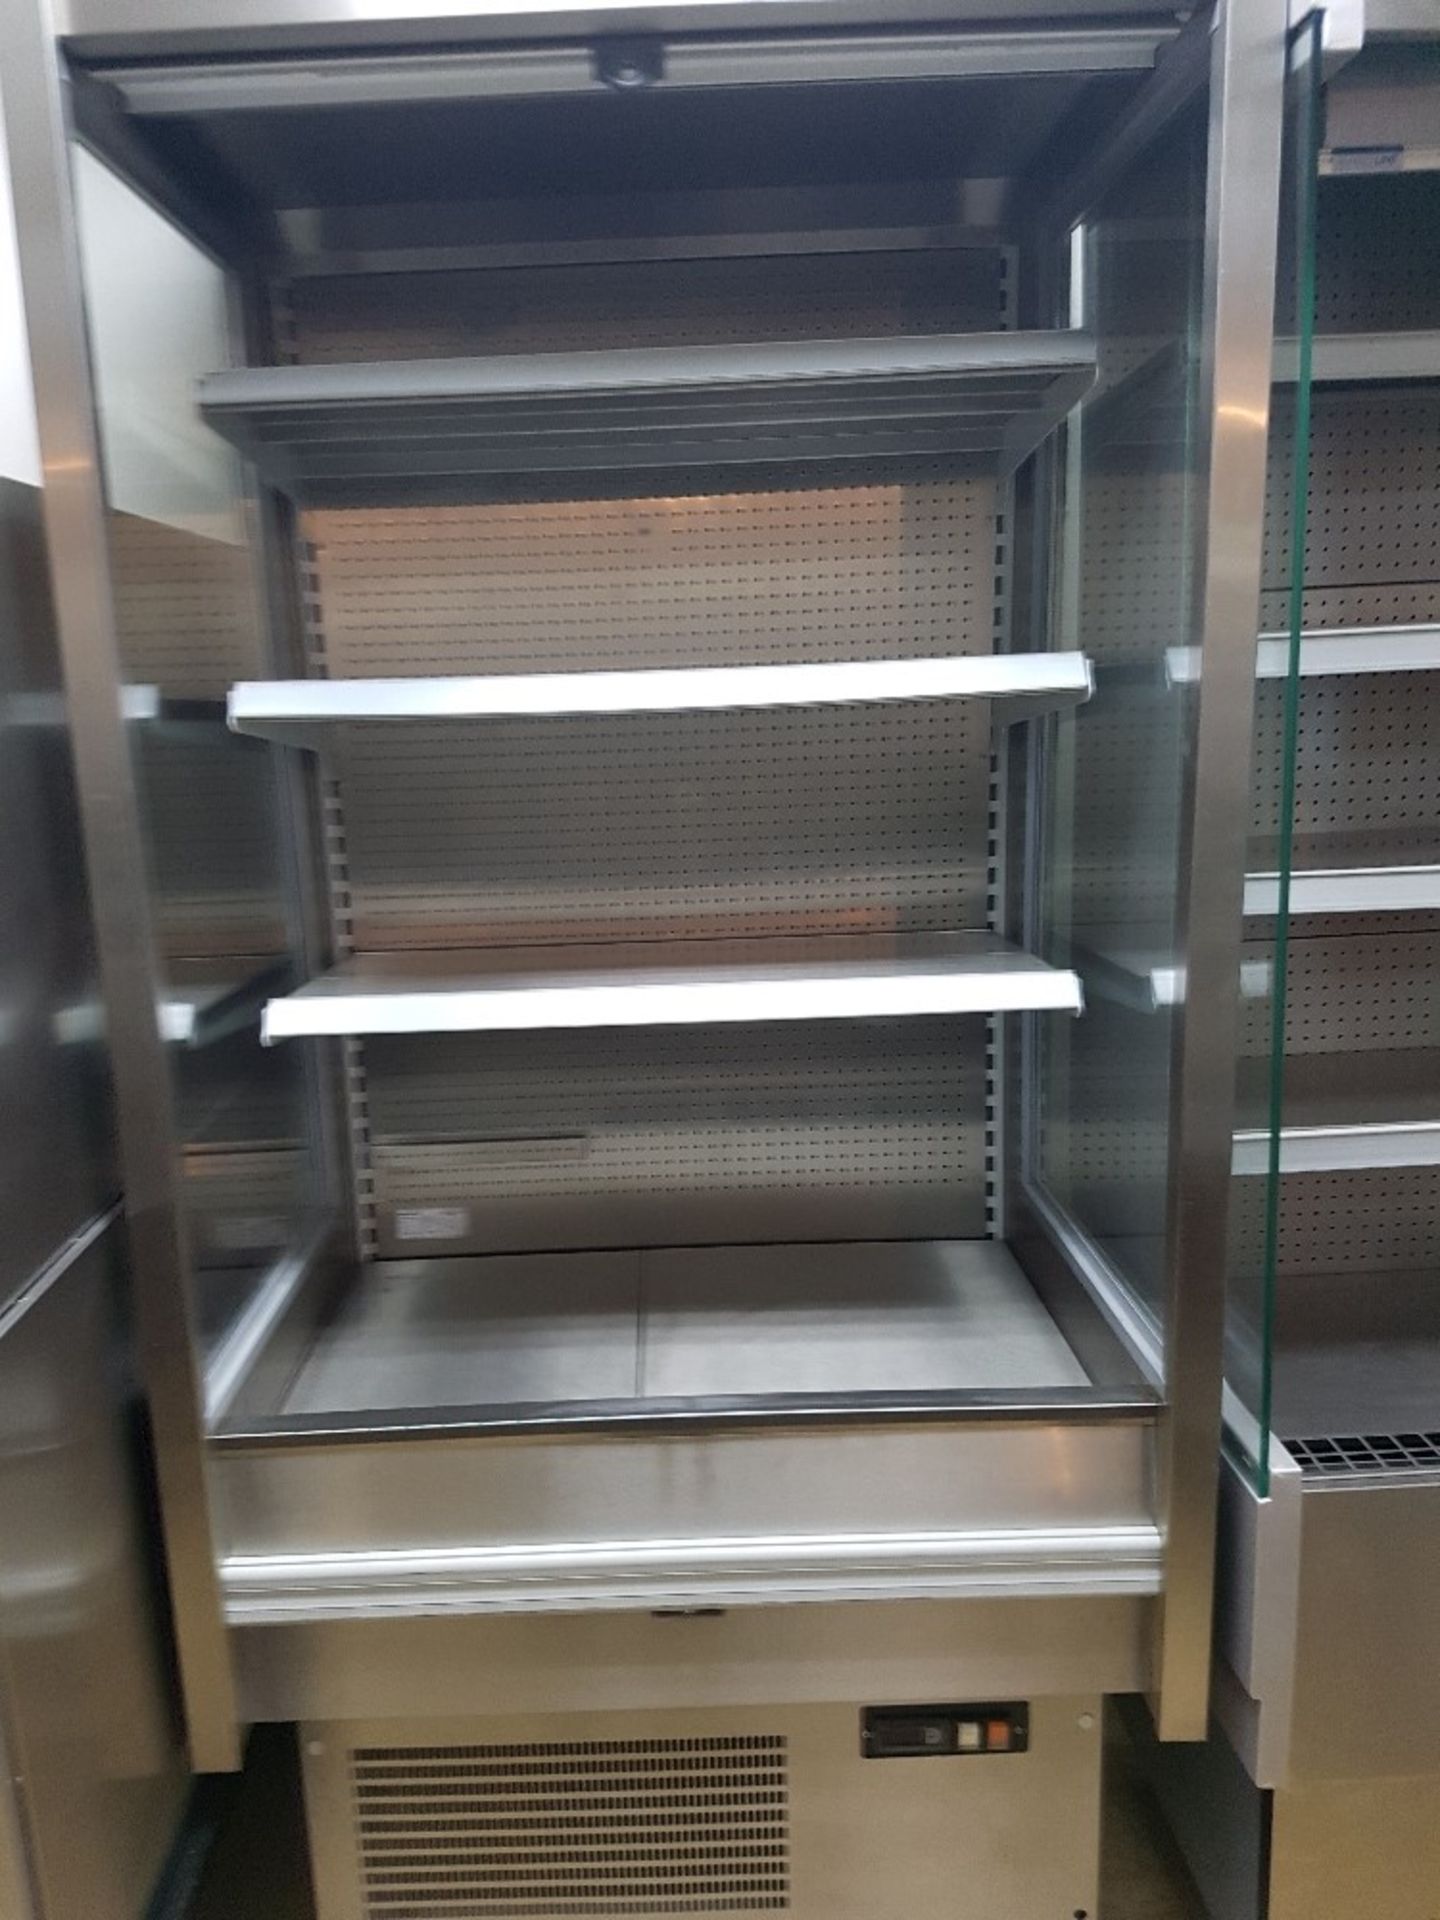 Stainless Steel Dairy Display Cabinet with Glass Sides + Night Blind - Fully Serviced & Tested